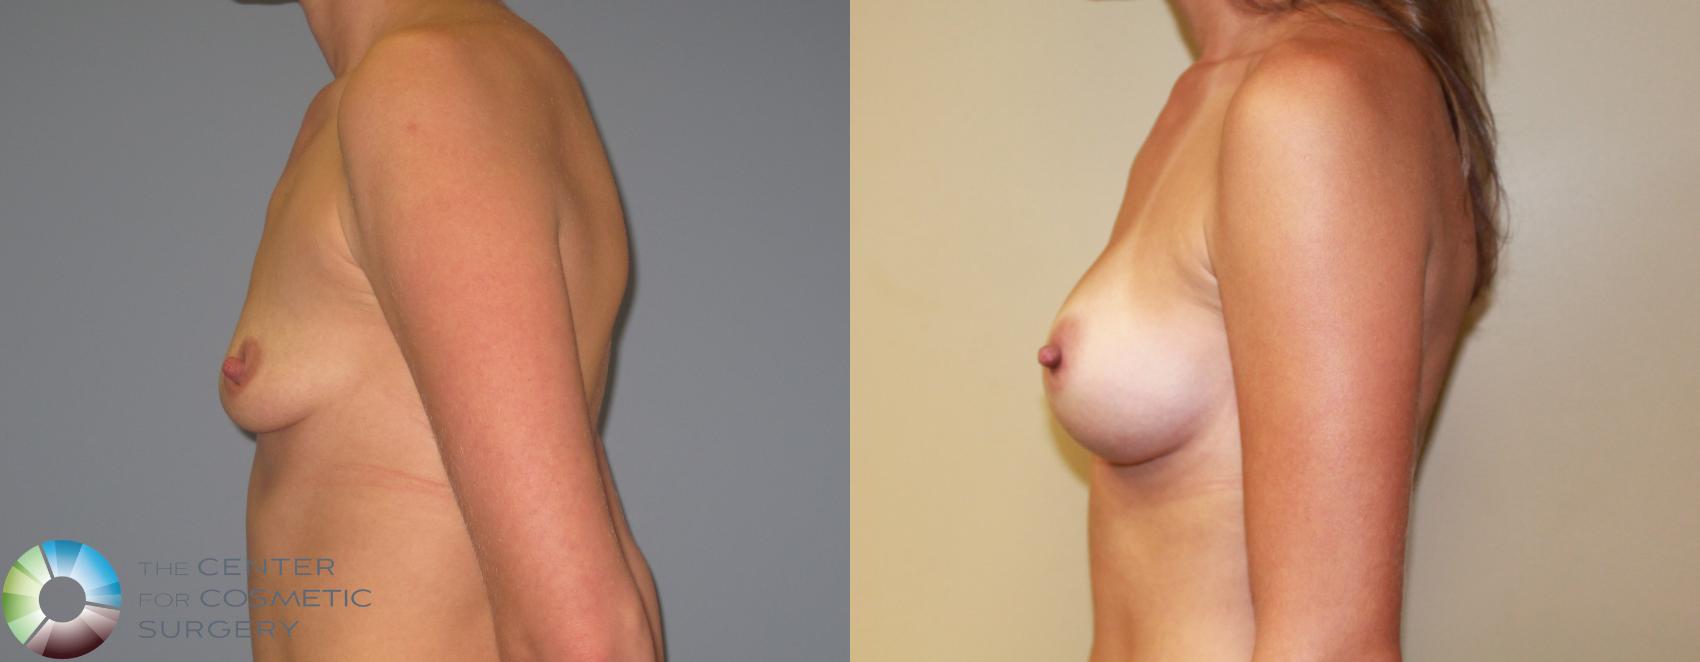 Before & After Breast Augmentation Case 11224 Left Side View in Golden, CO